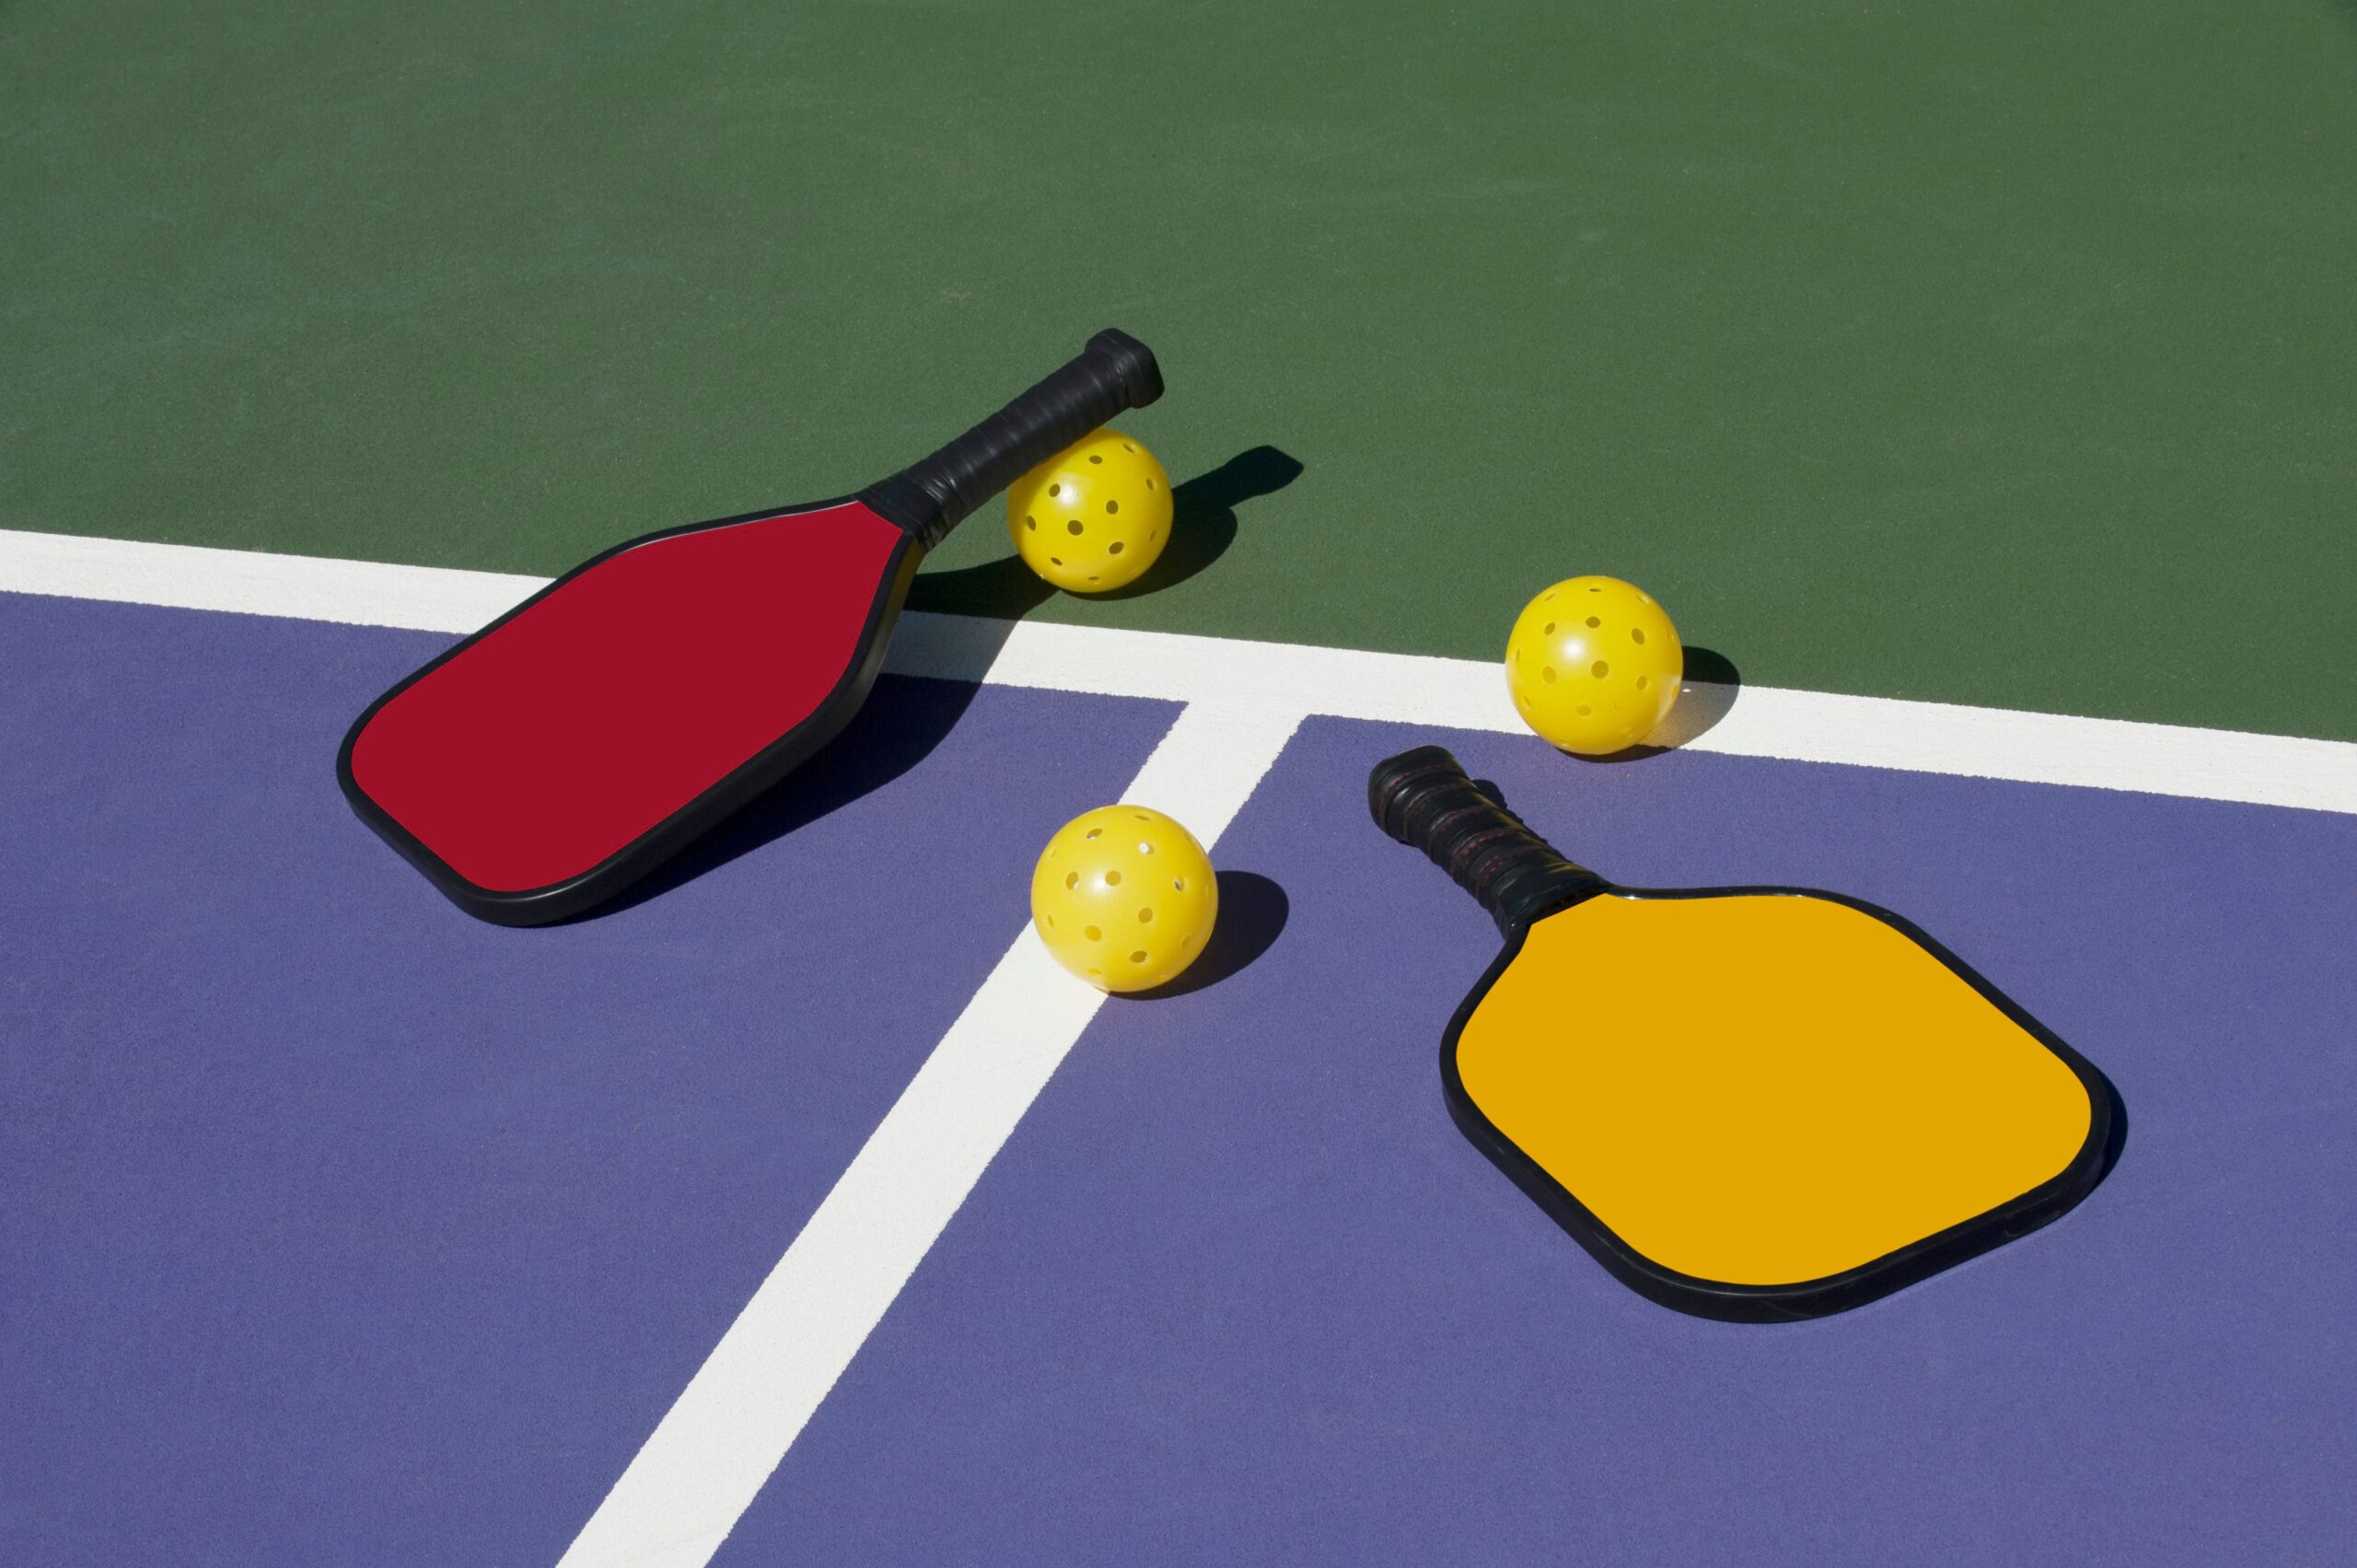 What is Pickleball? How do I get started?